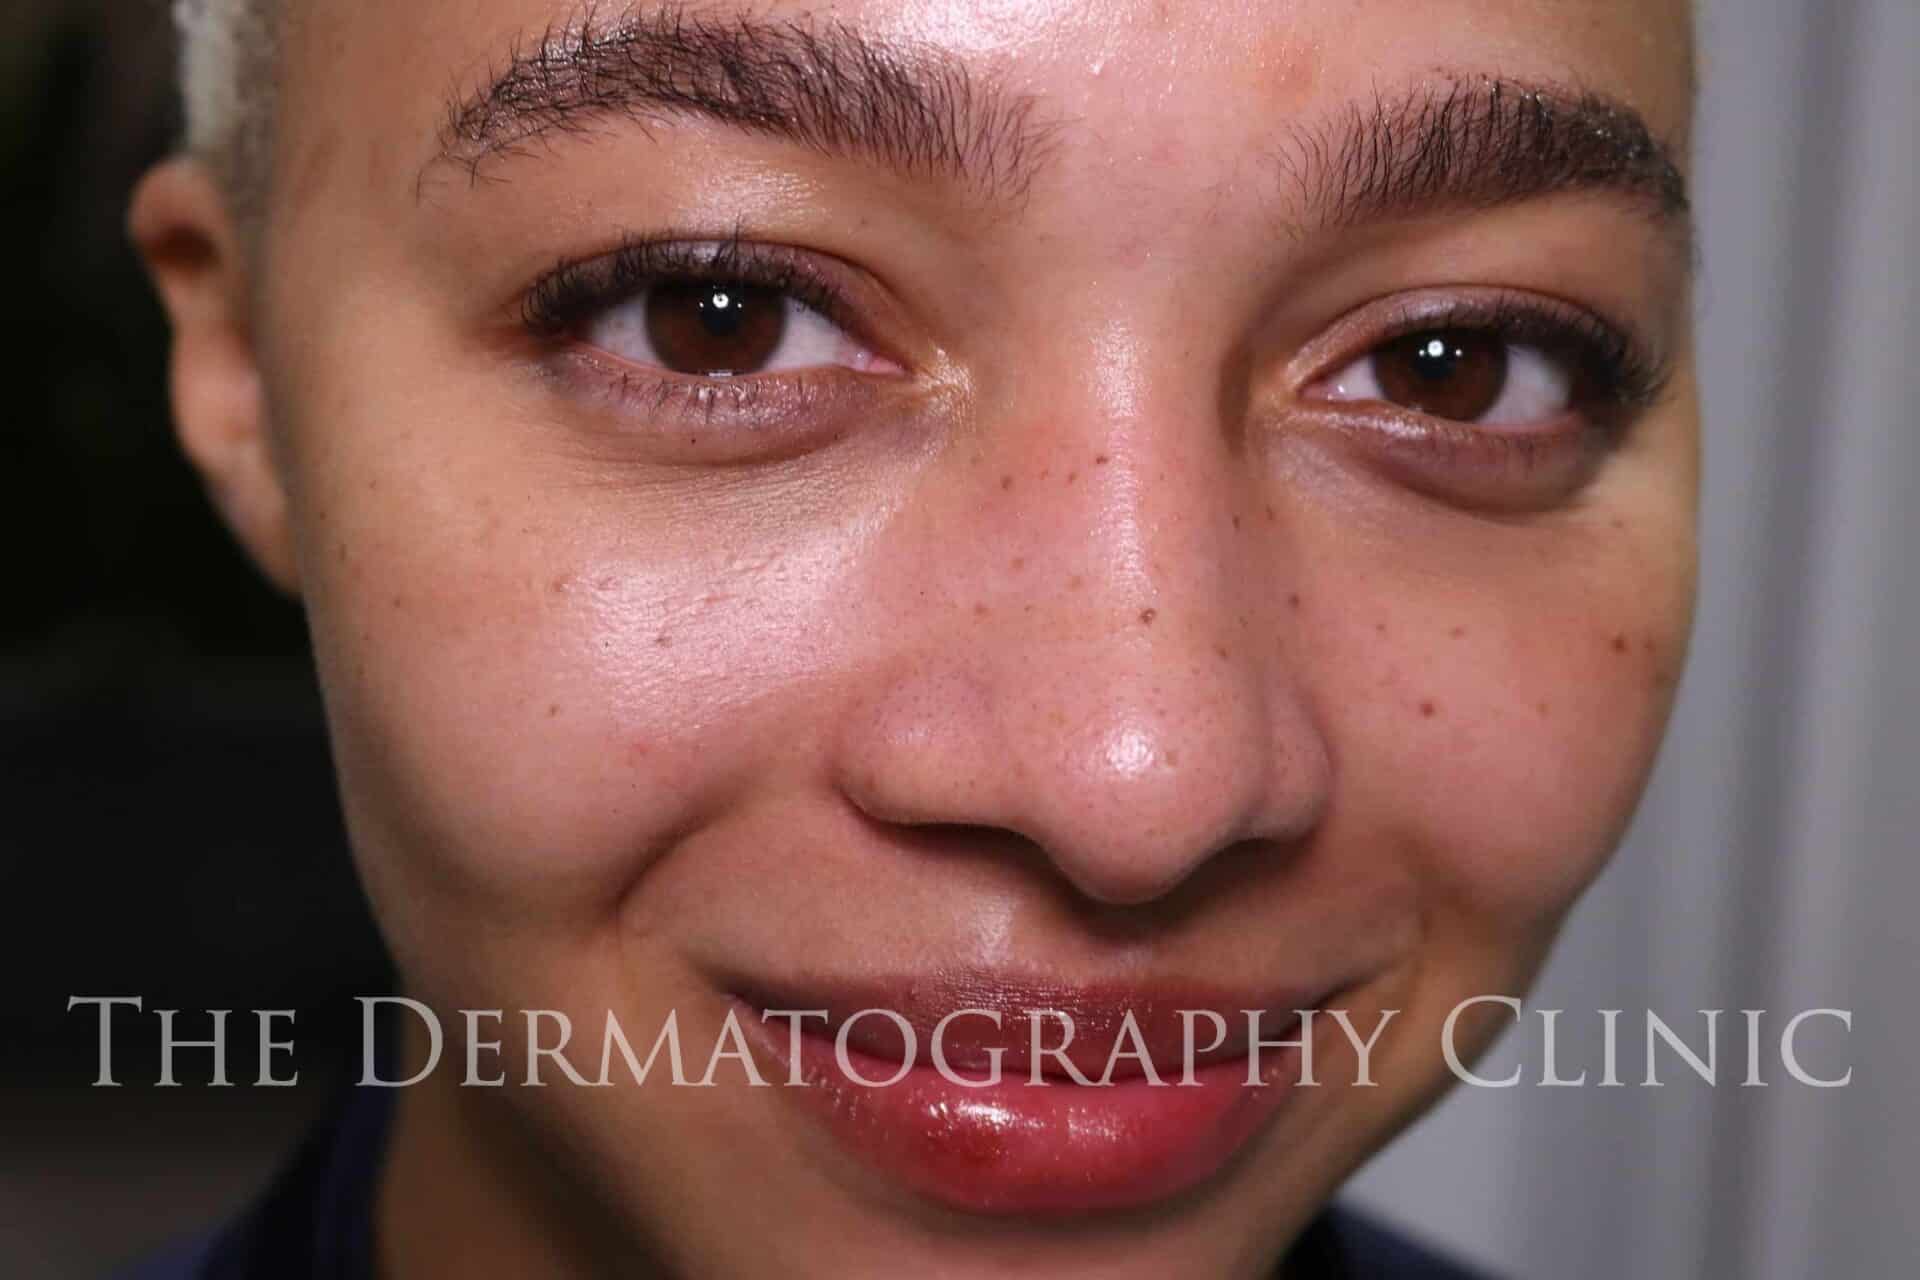 Cheek Tint Tattoo Healing ✨ & Healed Results -Cheek Tint Tattoo looks very  bold and bright immediately following the procedure. Once h... | Instagram